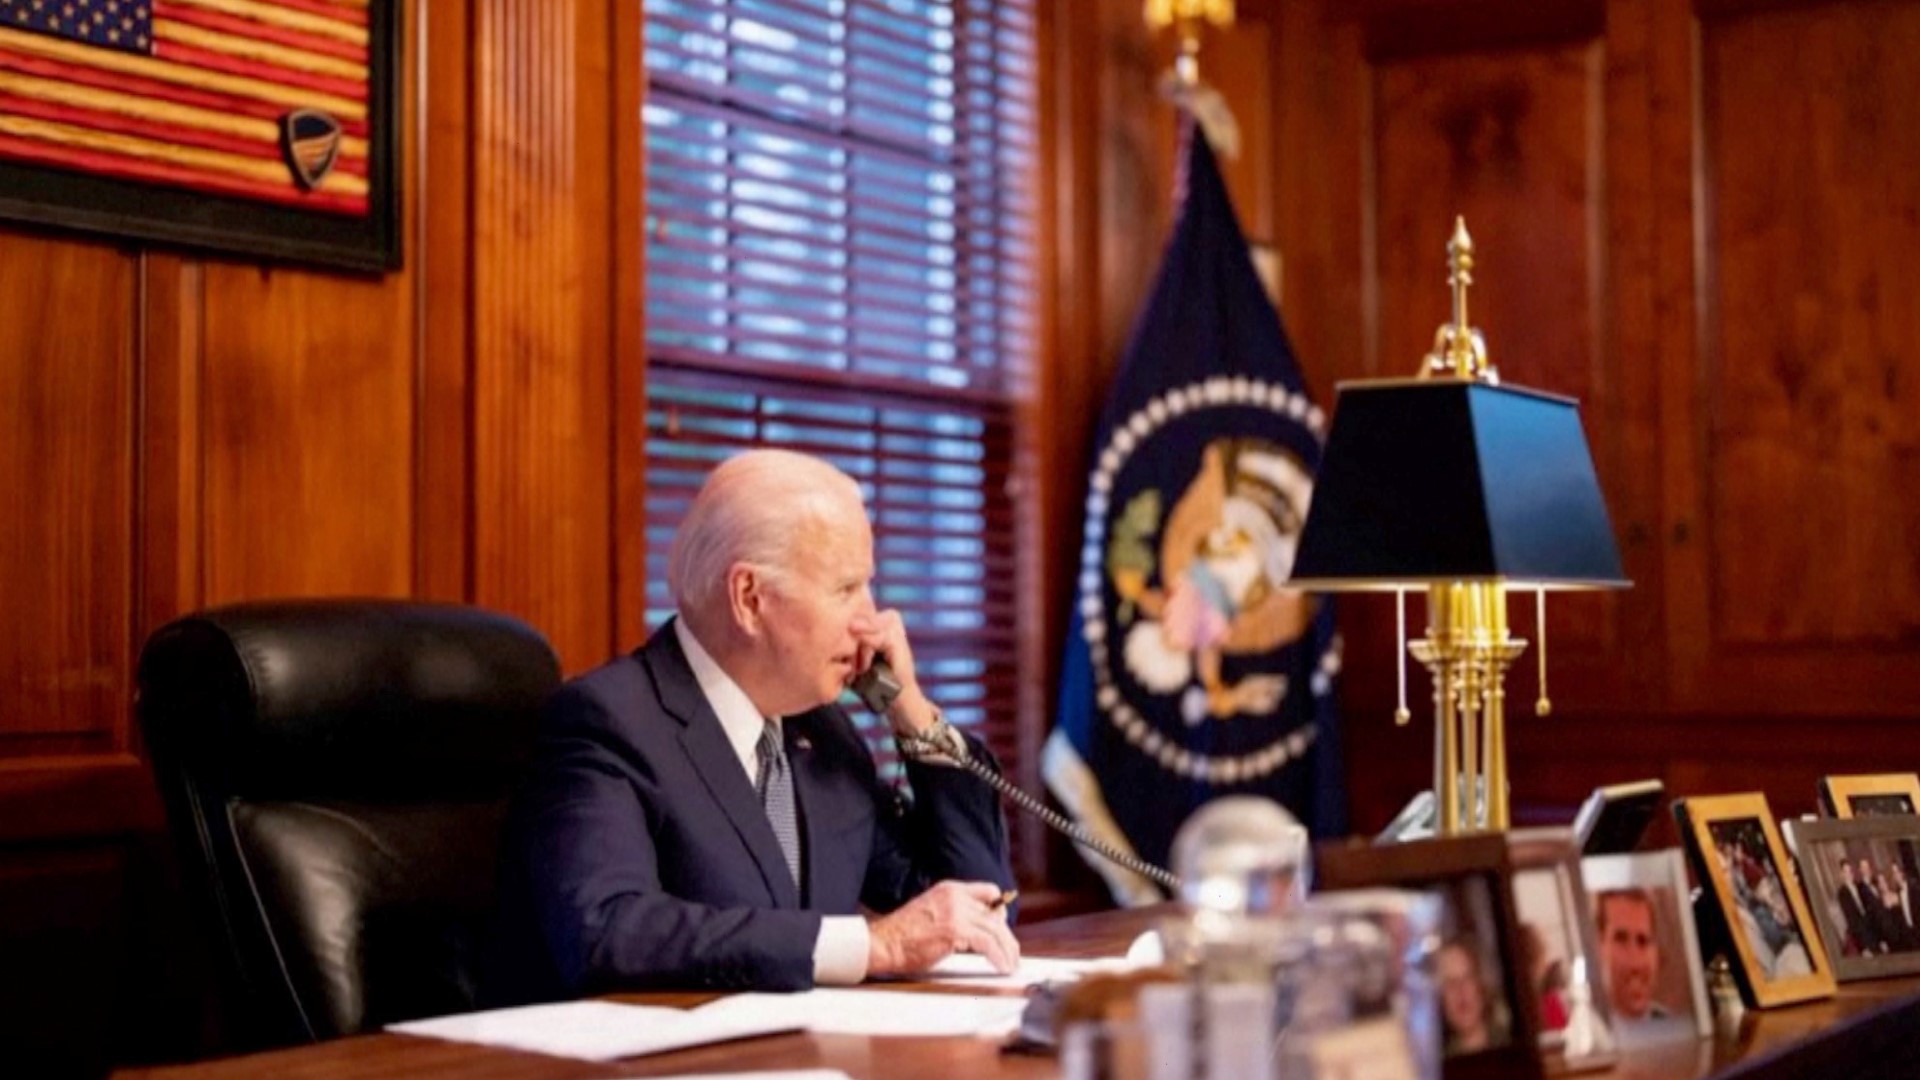 Another tense phone call between President Biden and Russia's President Putin over a military build-up along the Ukrainian border.